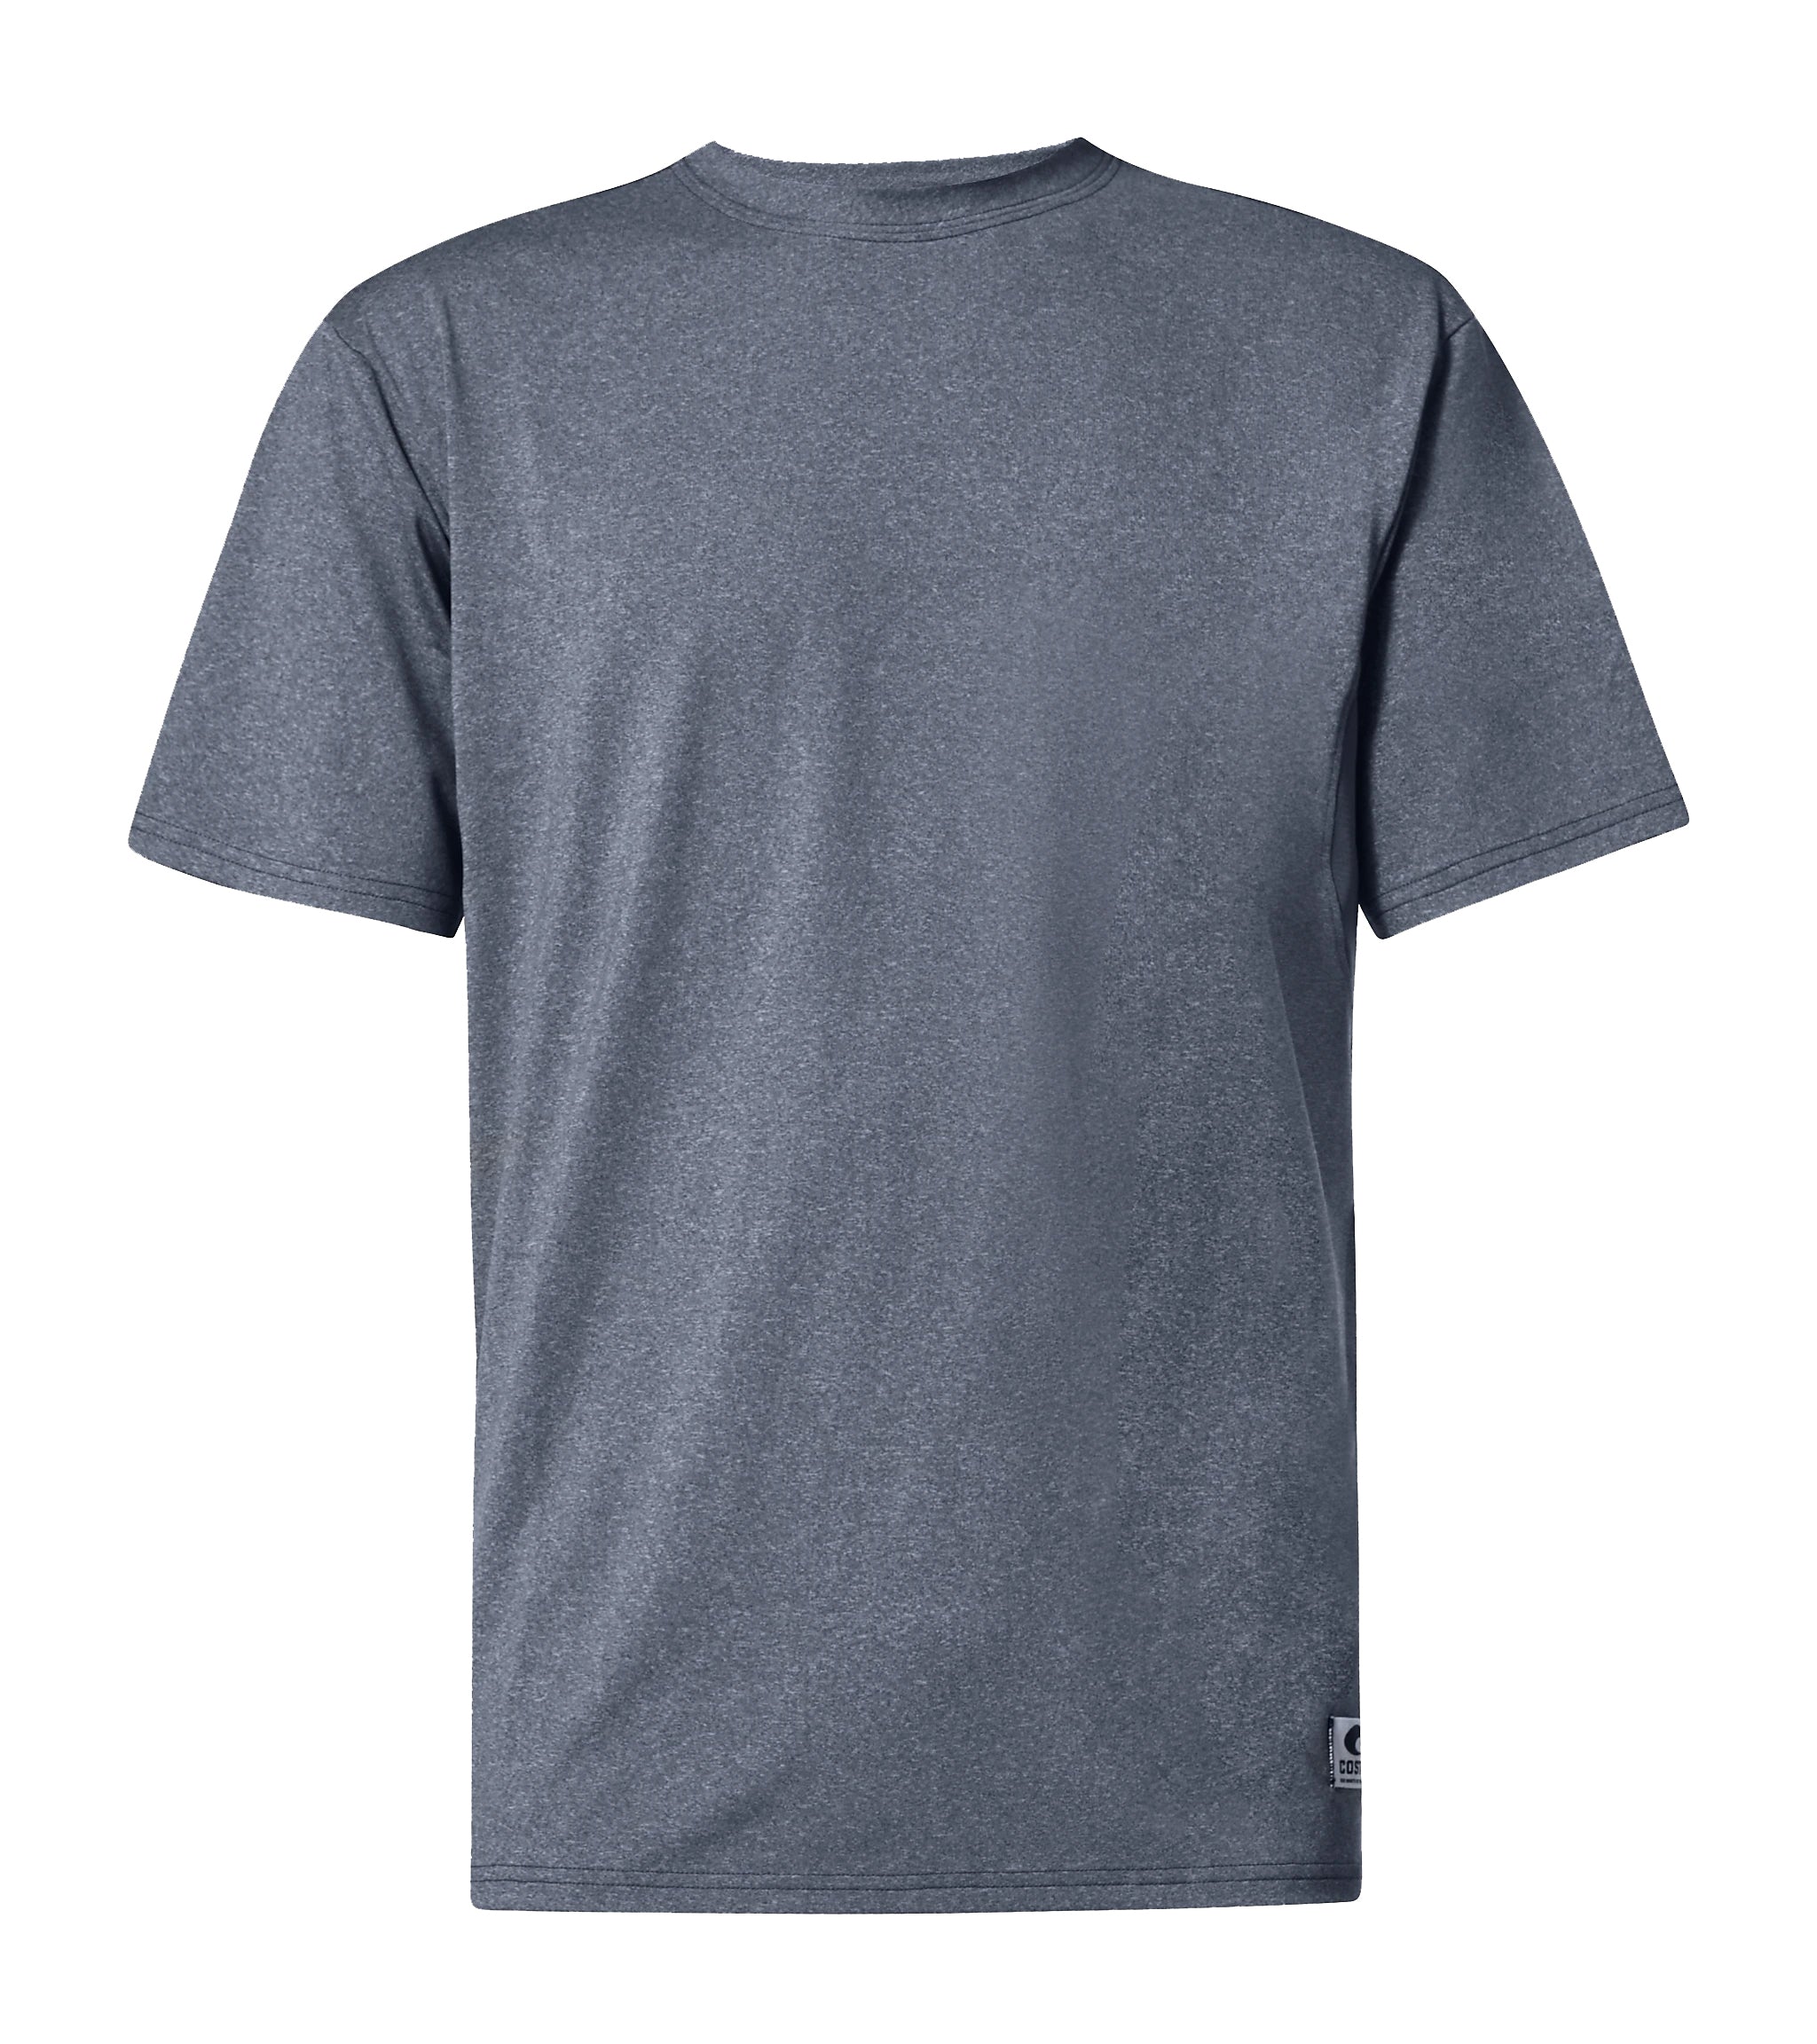 Costa Del Mar Voyage Performance SS Tee NavyBlueHeather s